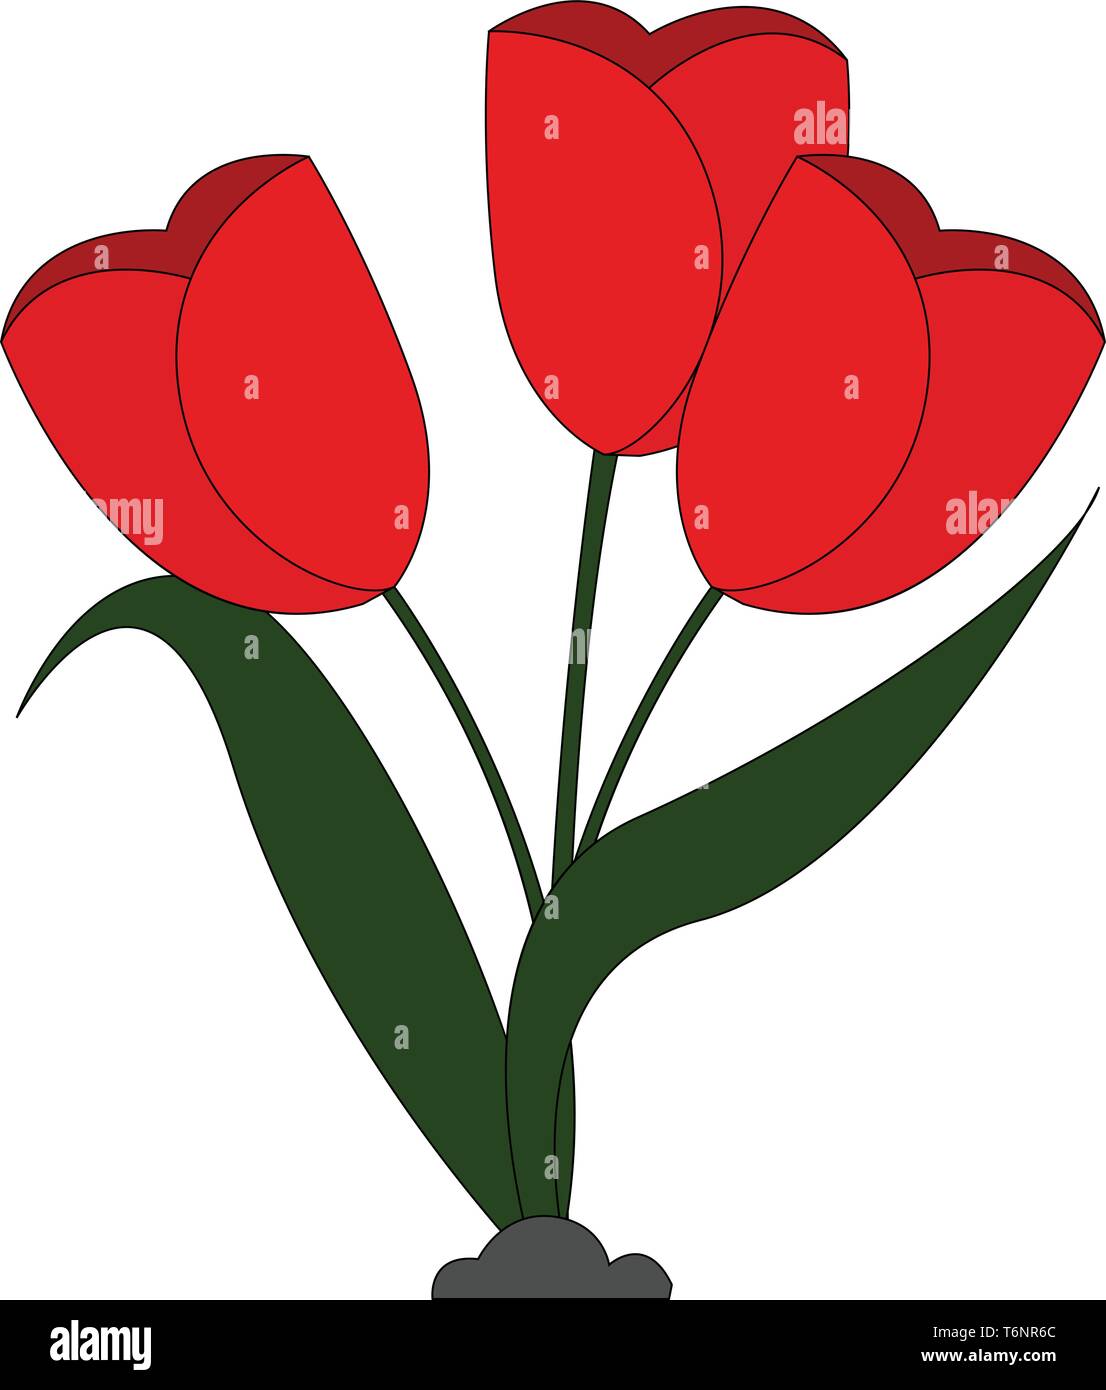 Clipart Of Beautiful Red Flowers With Elongated Green Leaves